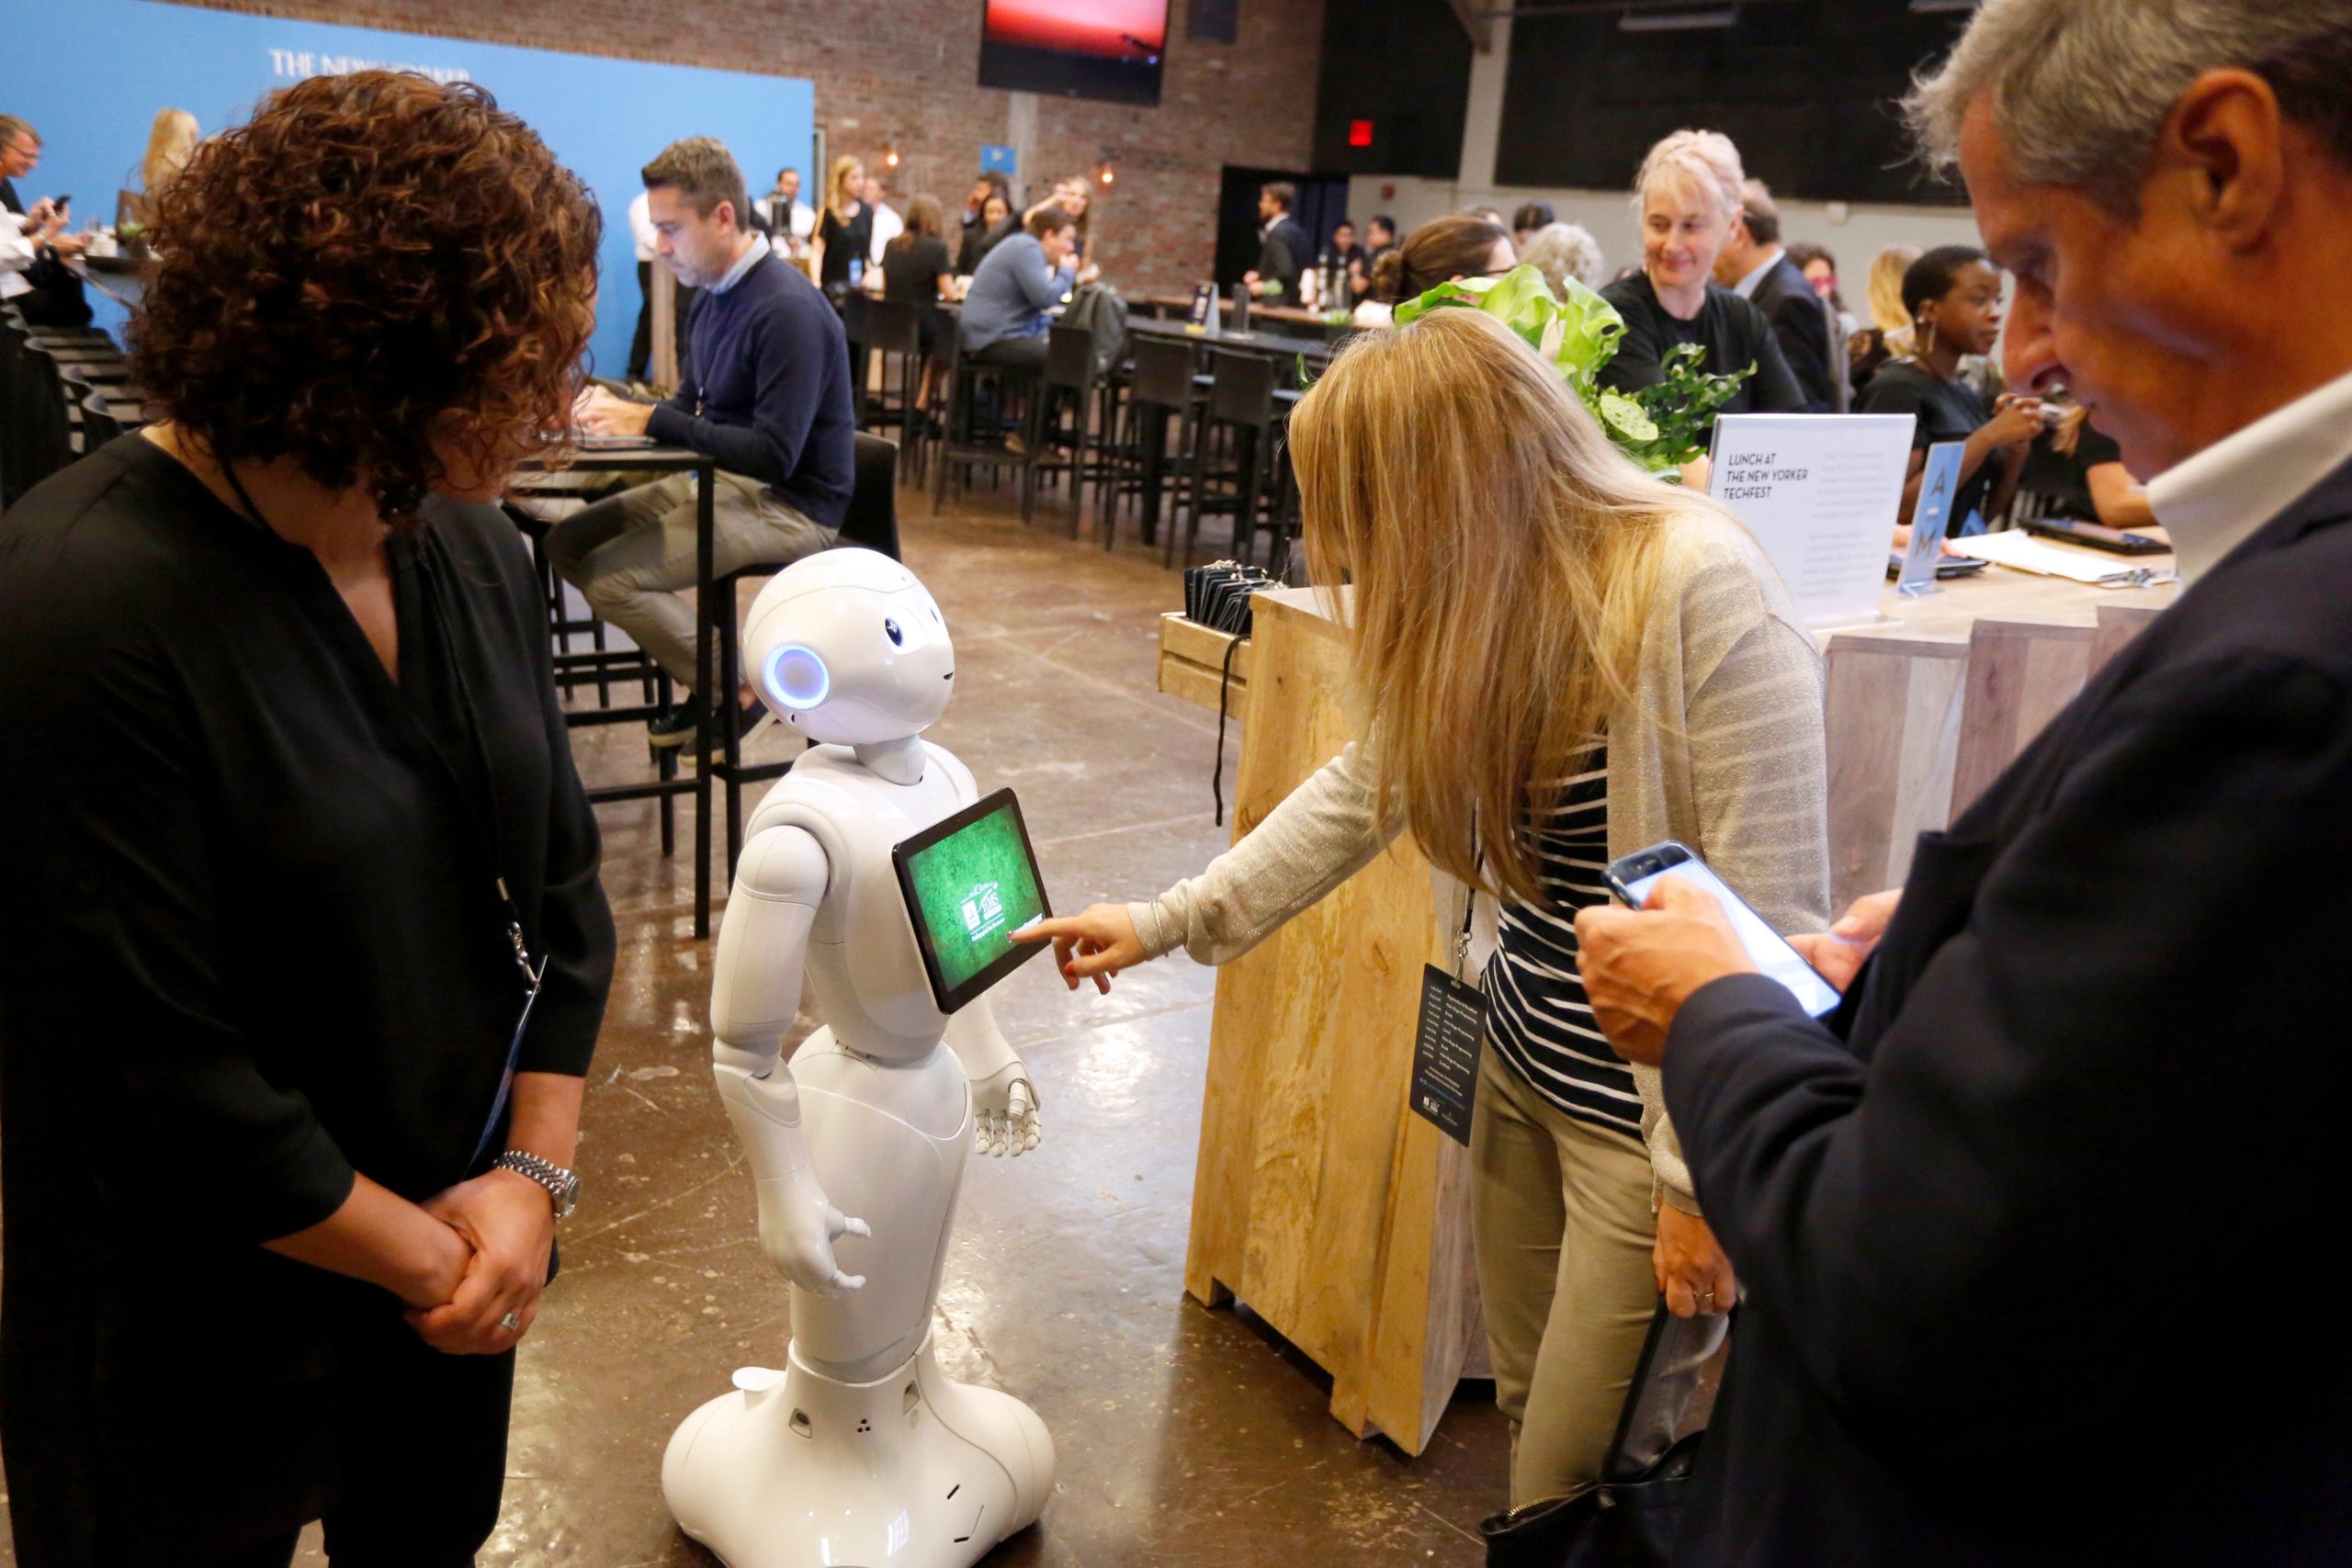 Guests interact with Pepper the robot during the 2017 New Yorker TechFest at Cedar Lake on October 6, 2017 in New York City.  (Photo: Brian Ach/Getty Images for The New Yorker, Getty Images)